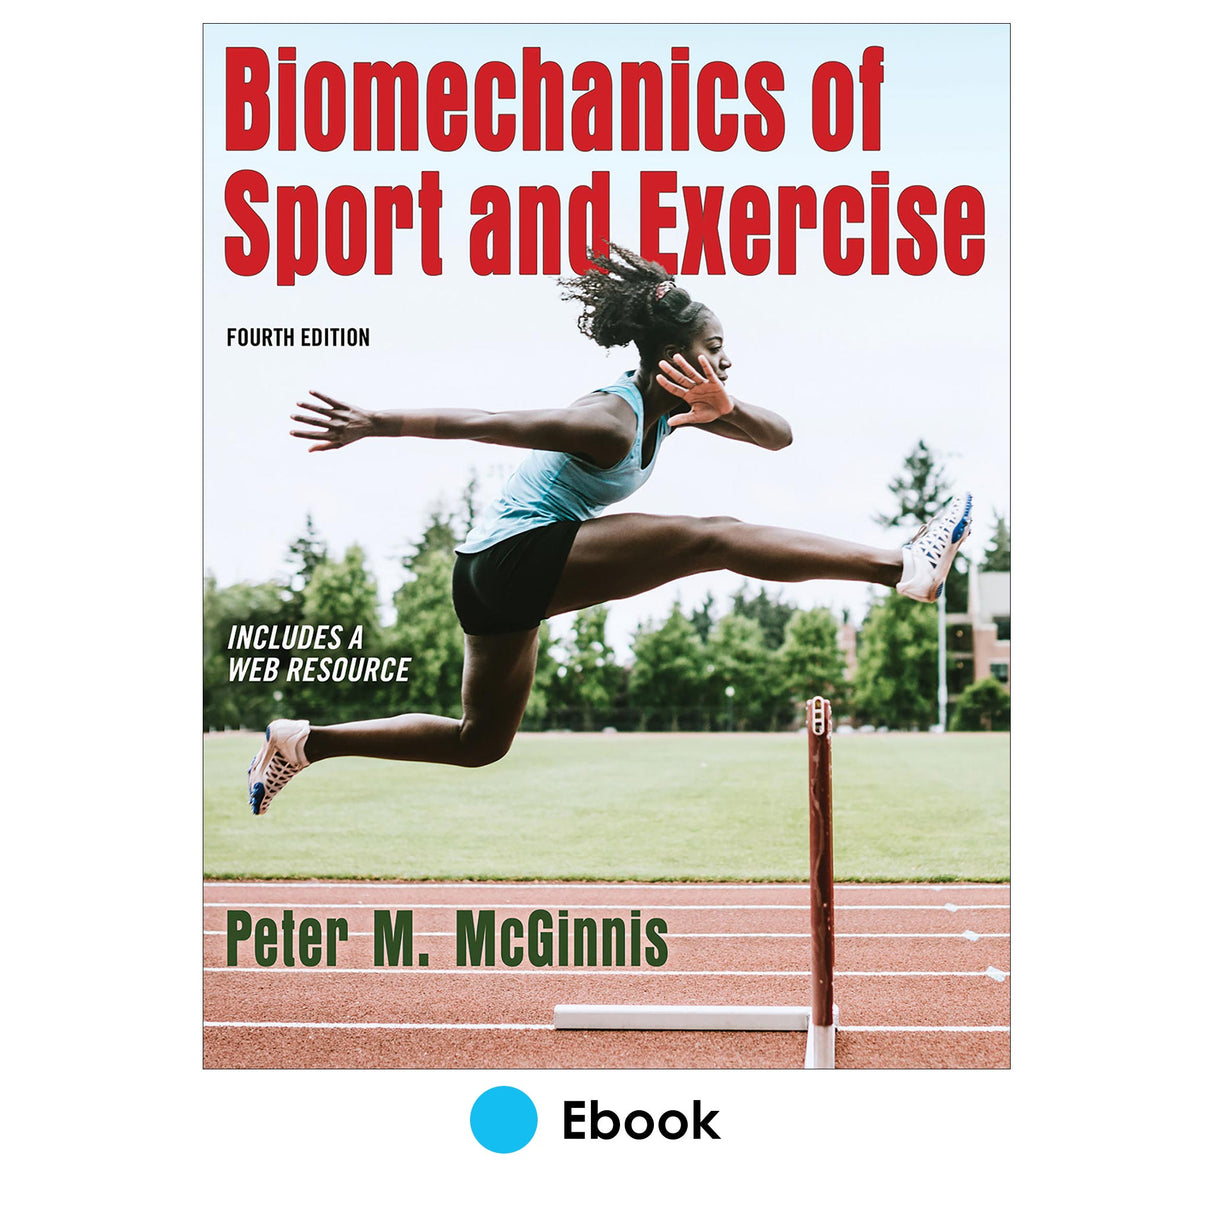 Biomechanics of Sport and Exercise 4th Edition epub With Web Resource